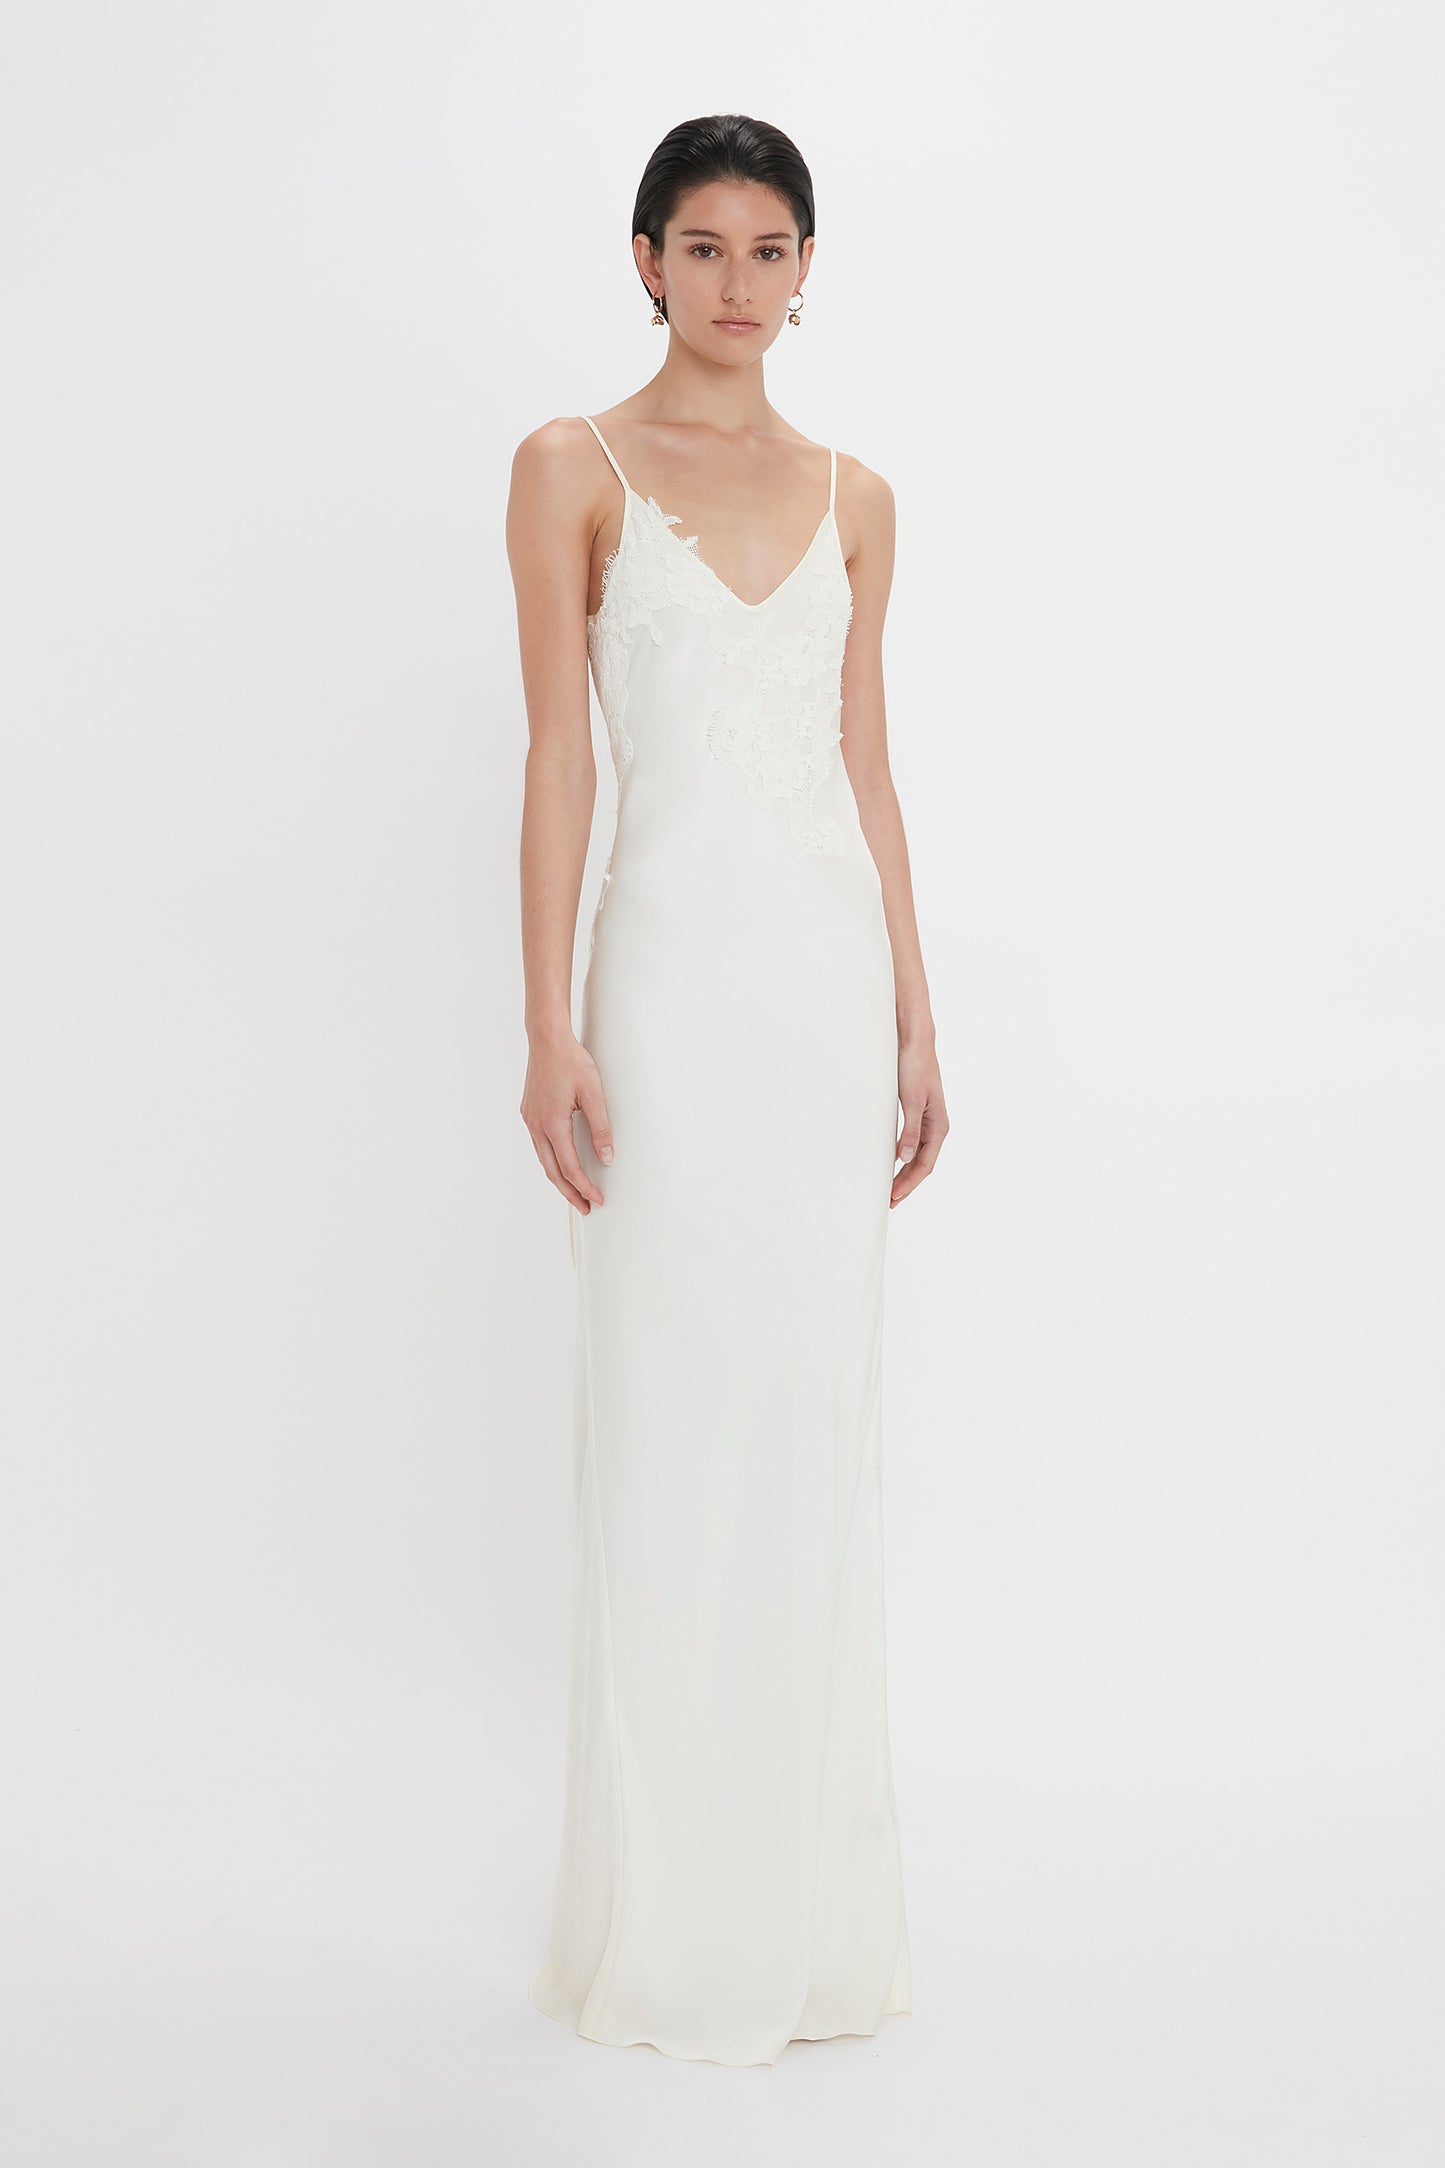 A woman in a white sleeveless lace-top wedding gown and Victoria Beckham's Exclusive Camellia Flower Hoop Earrings In Gold standing against a plain white backdrop.